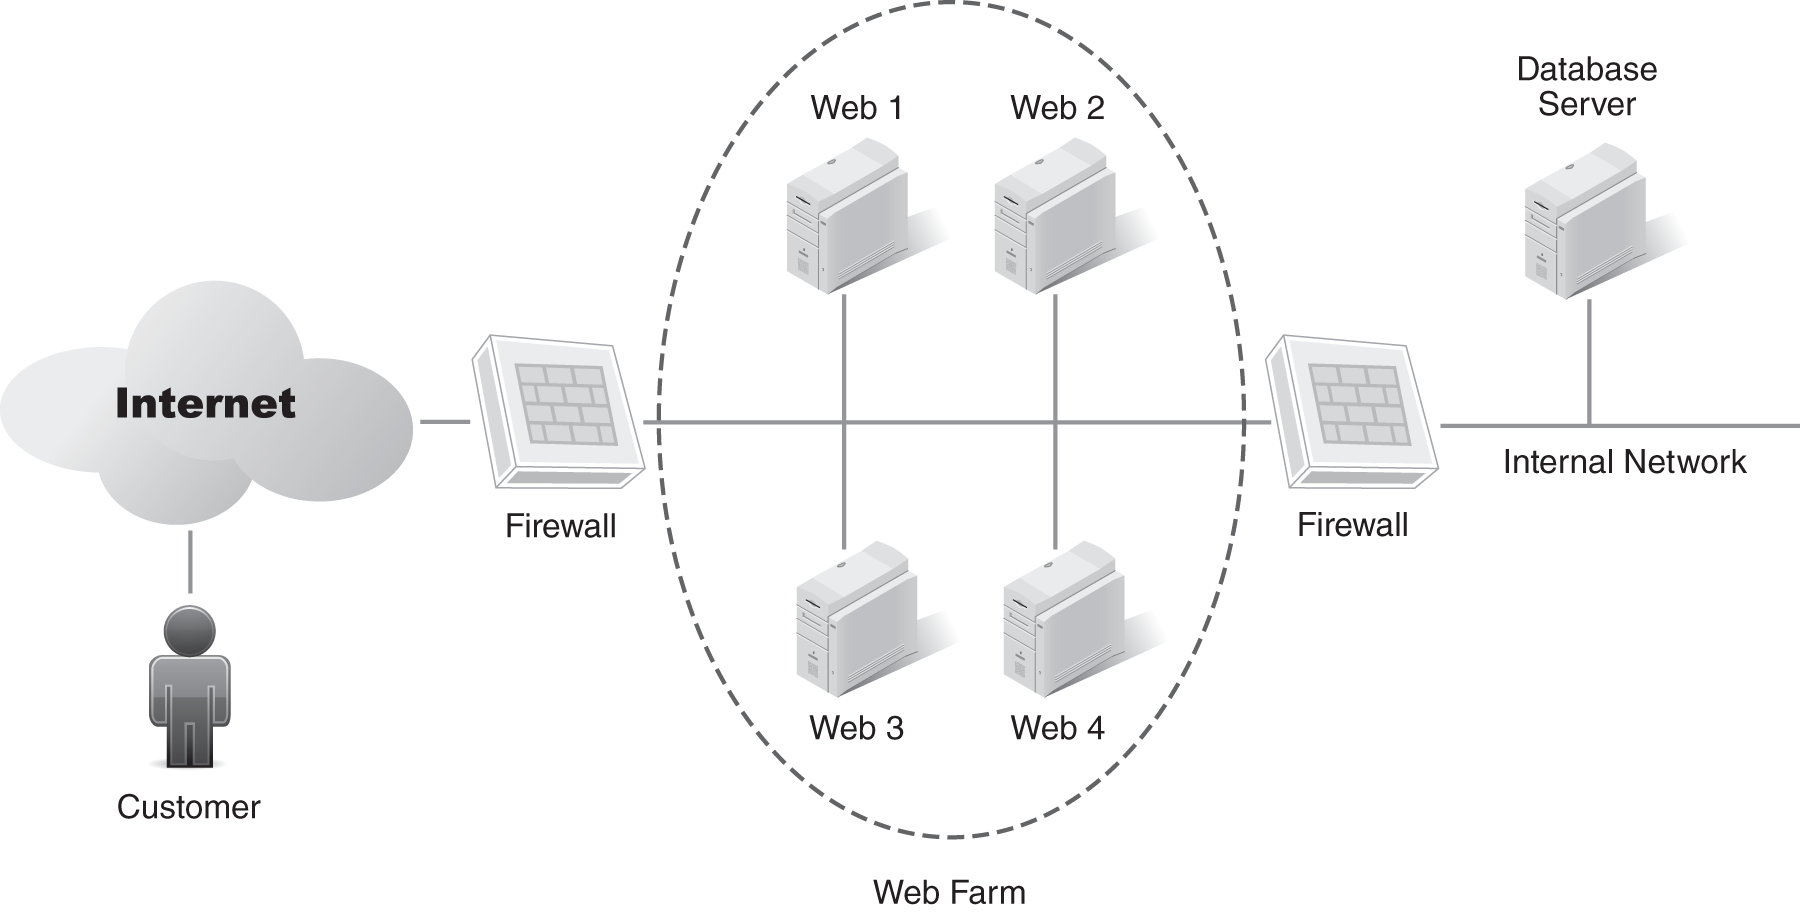 A network diagram of a web farm with a database in the back-end.